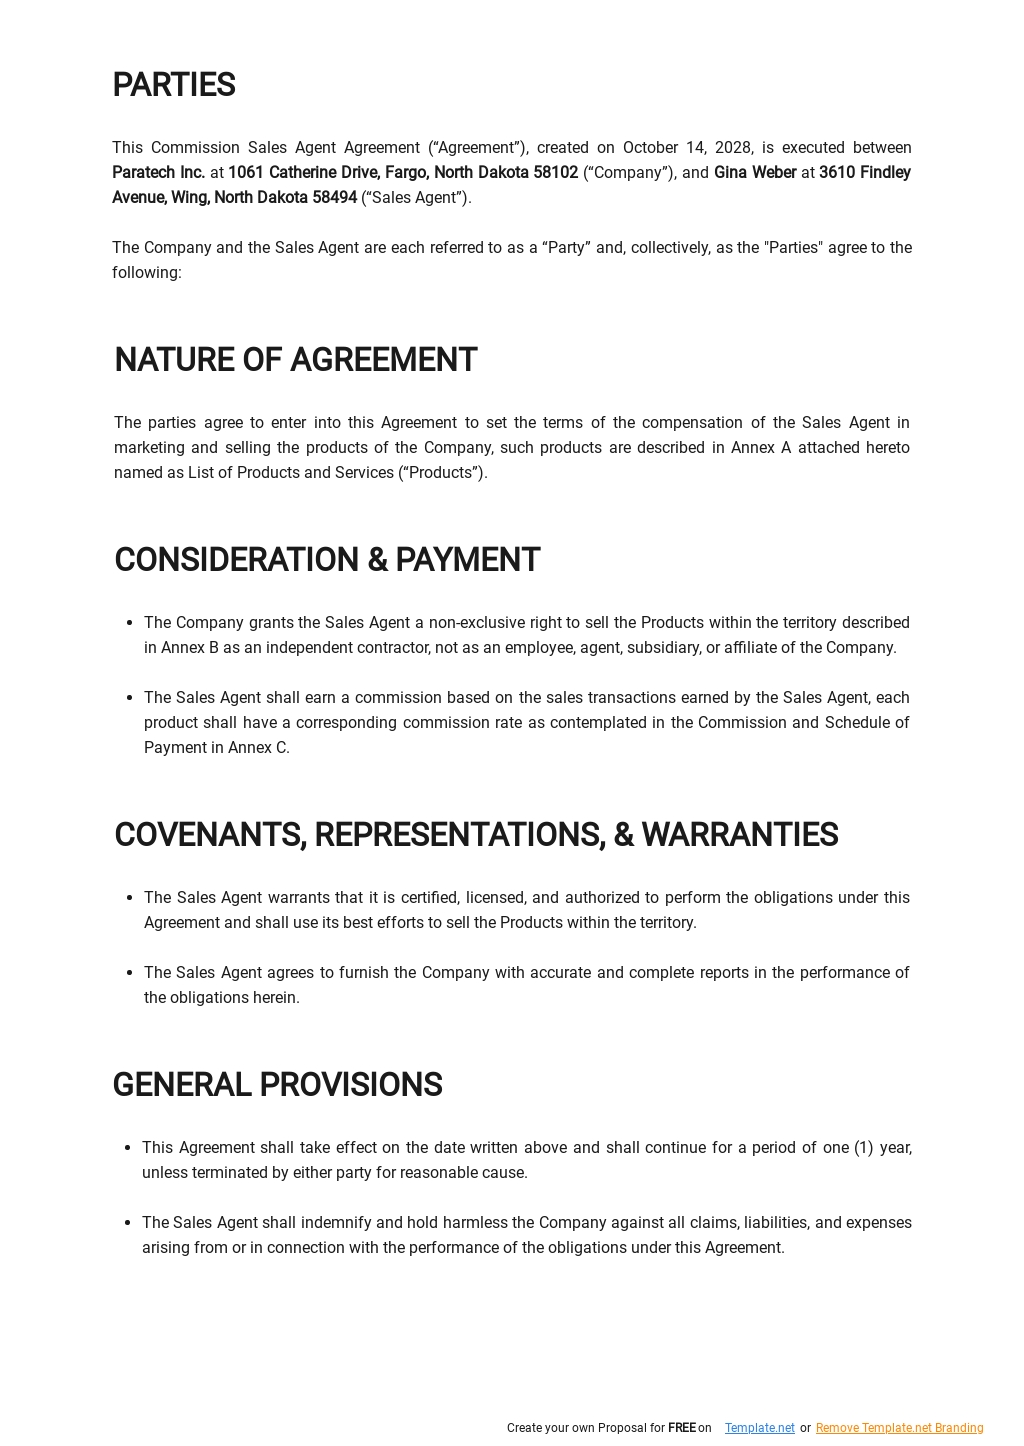 Commission Sales Agent Agreement Template 1.jpe